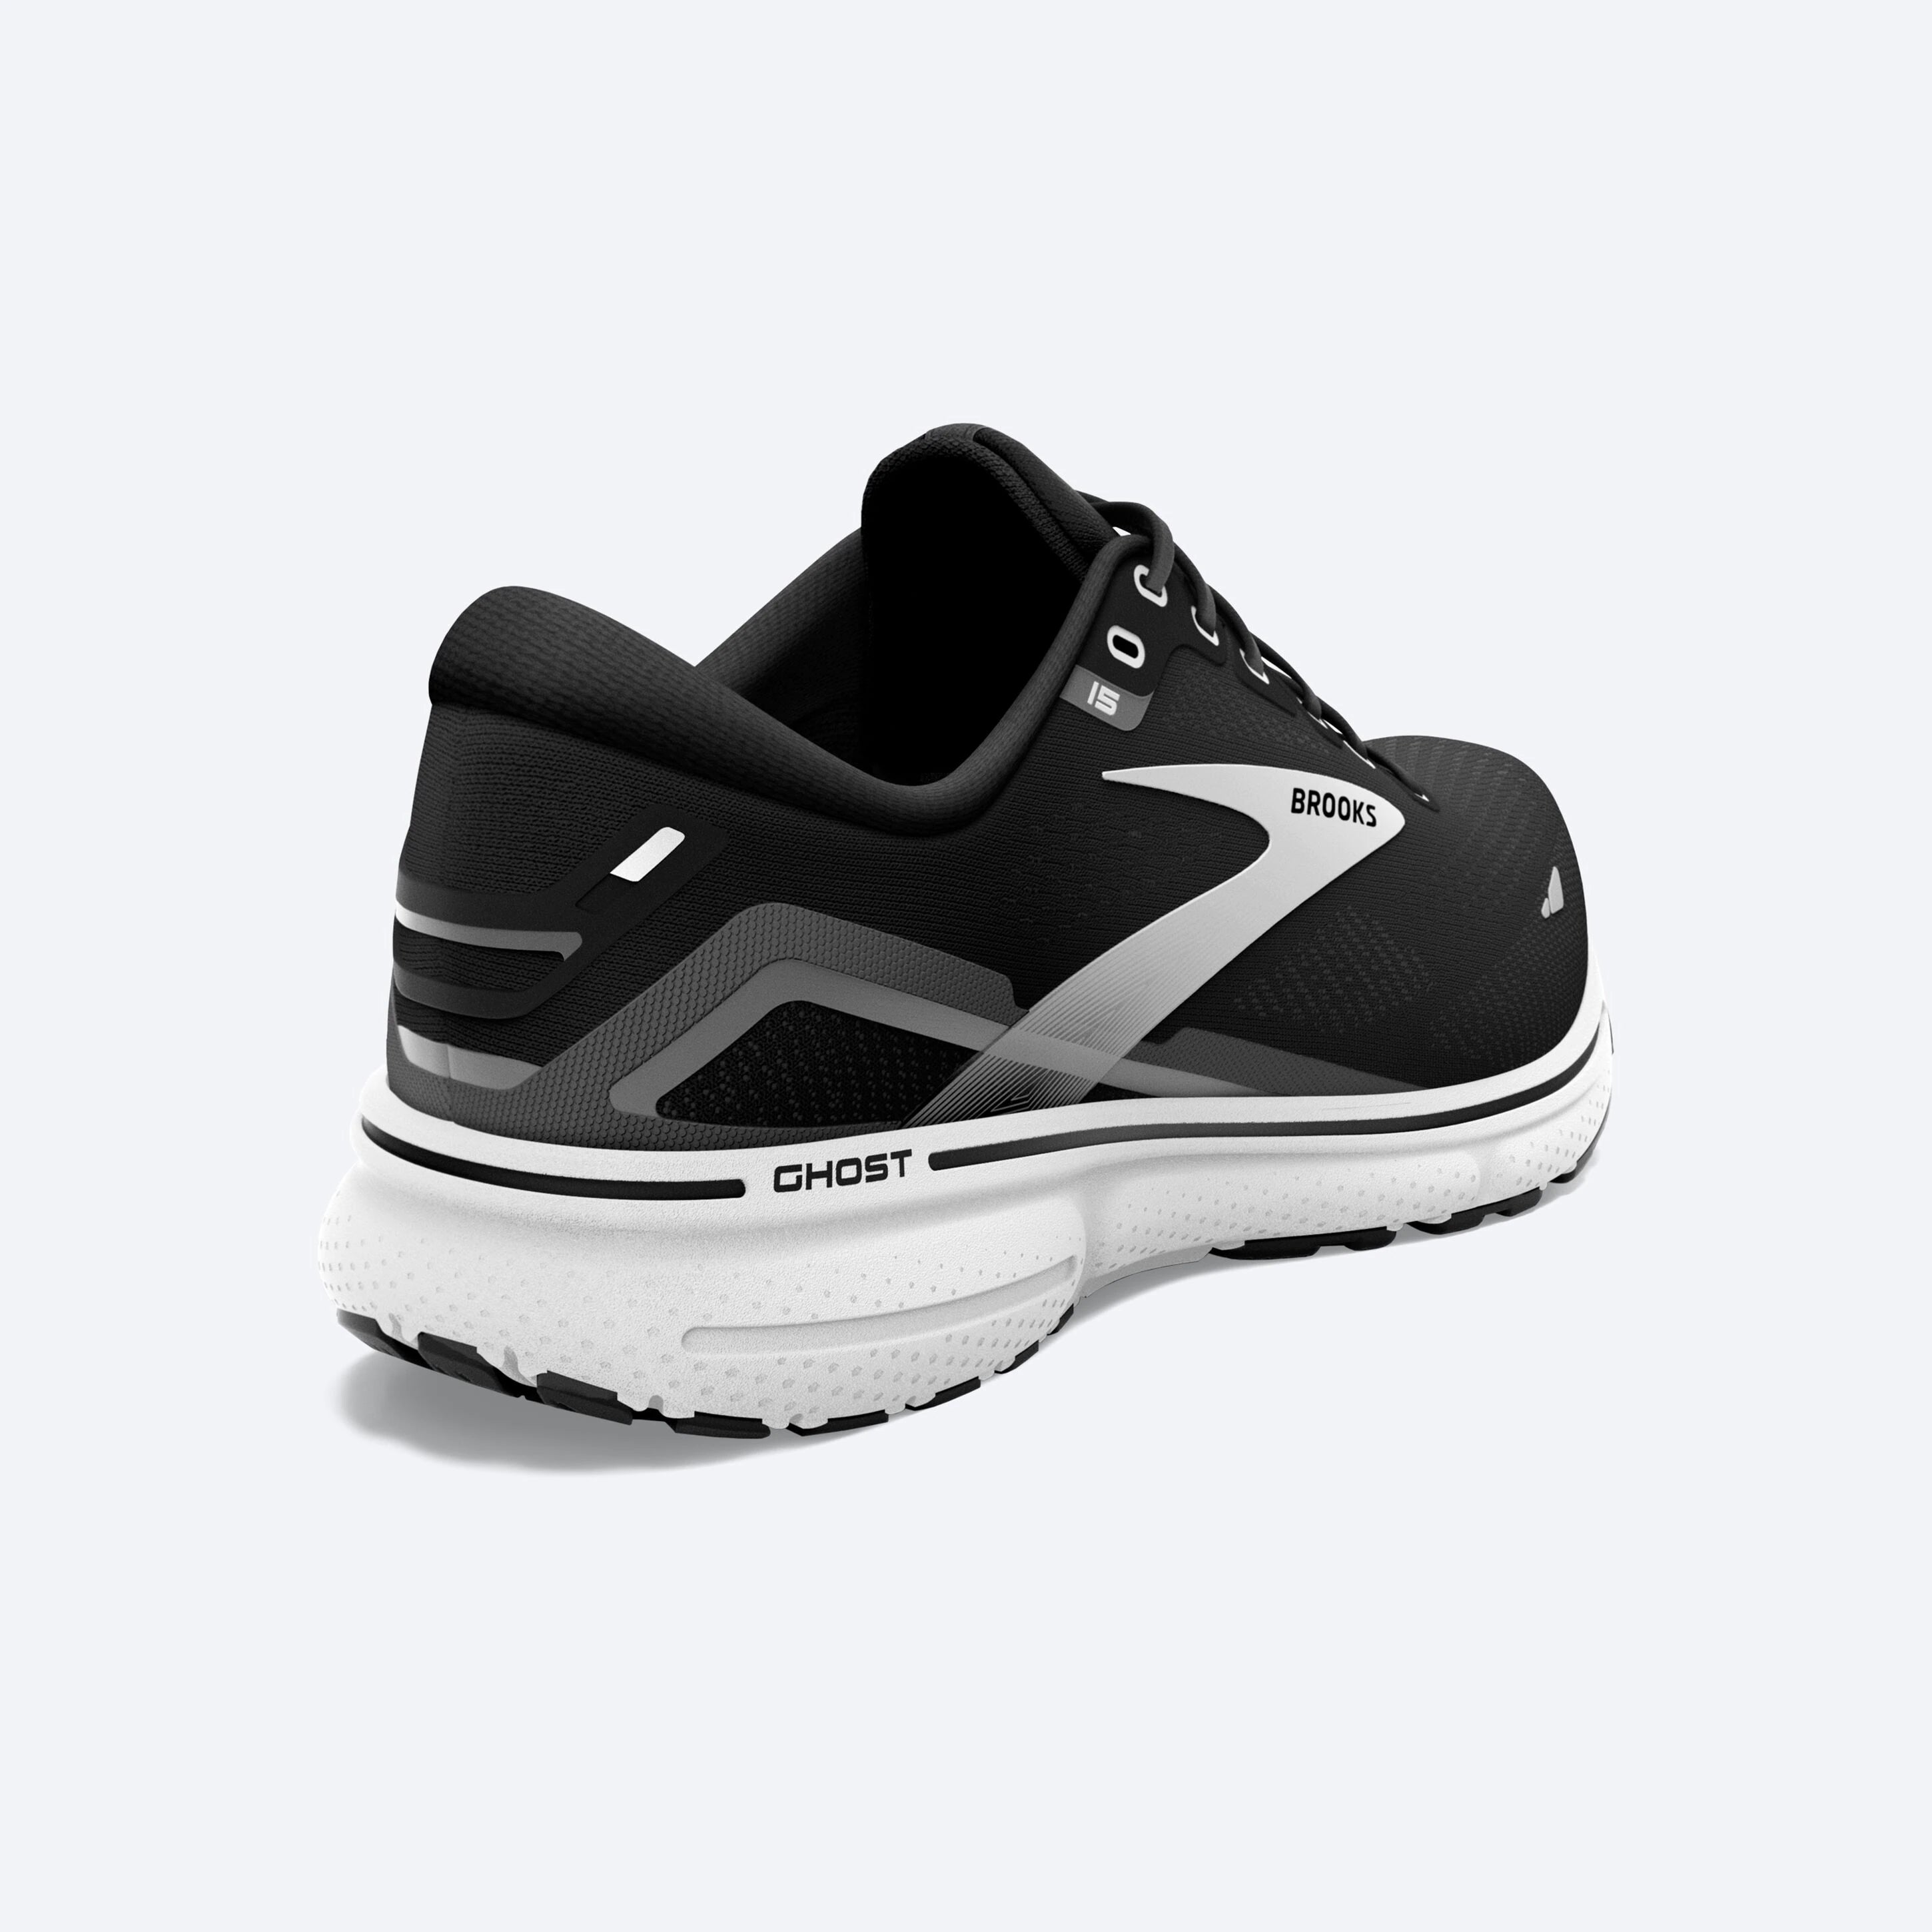 Back angled view of the Women's Ghost 15 by Brooks in the color Black/BlackenedPearl/White  